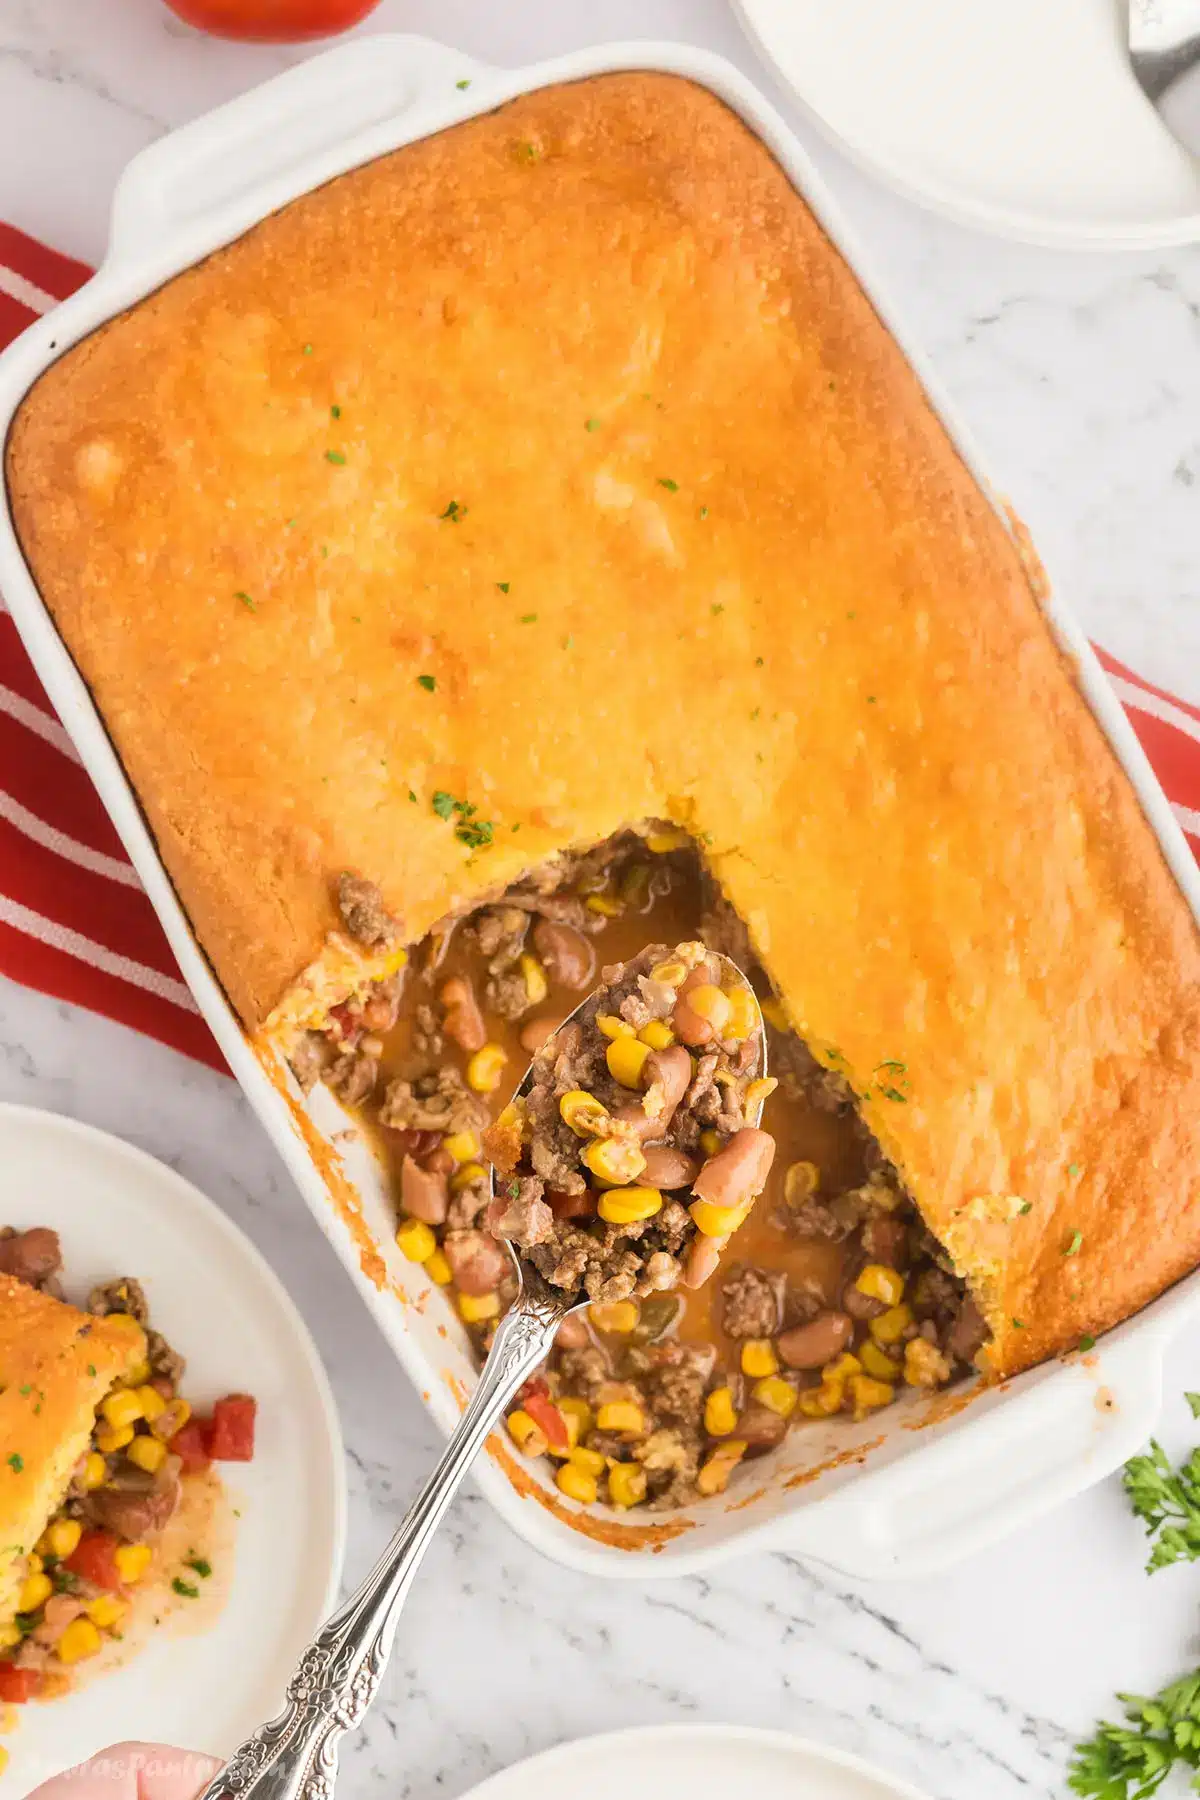 An overhead image of the cornbread casserole with a serving spoon.